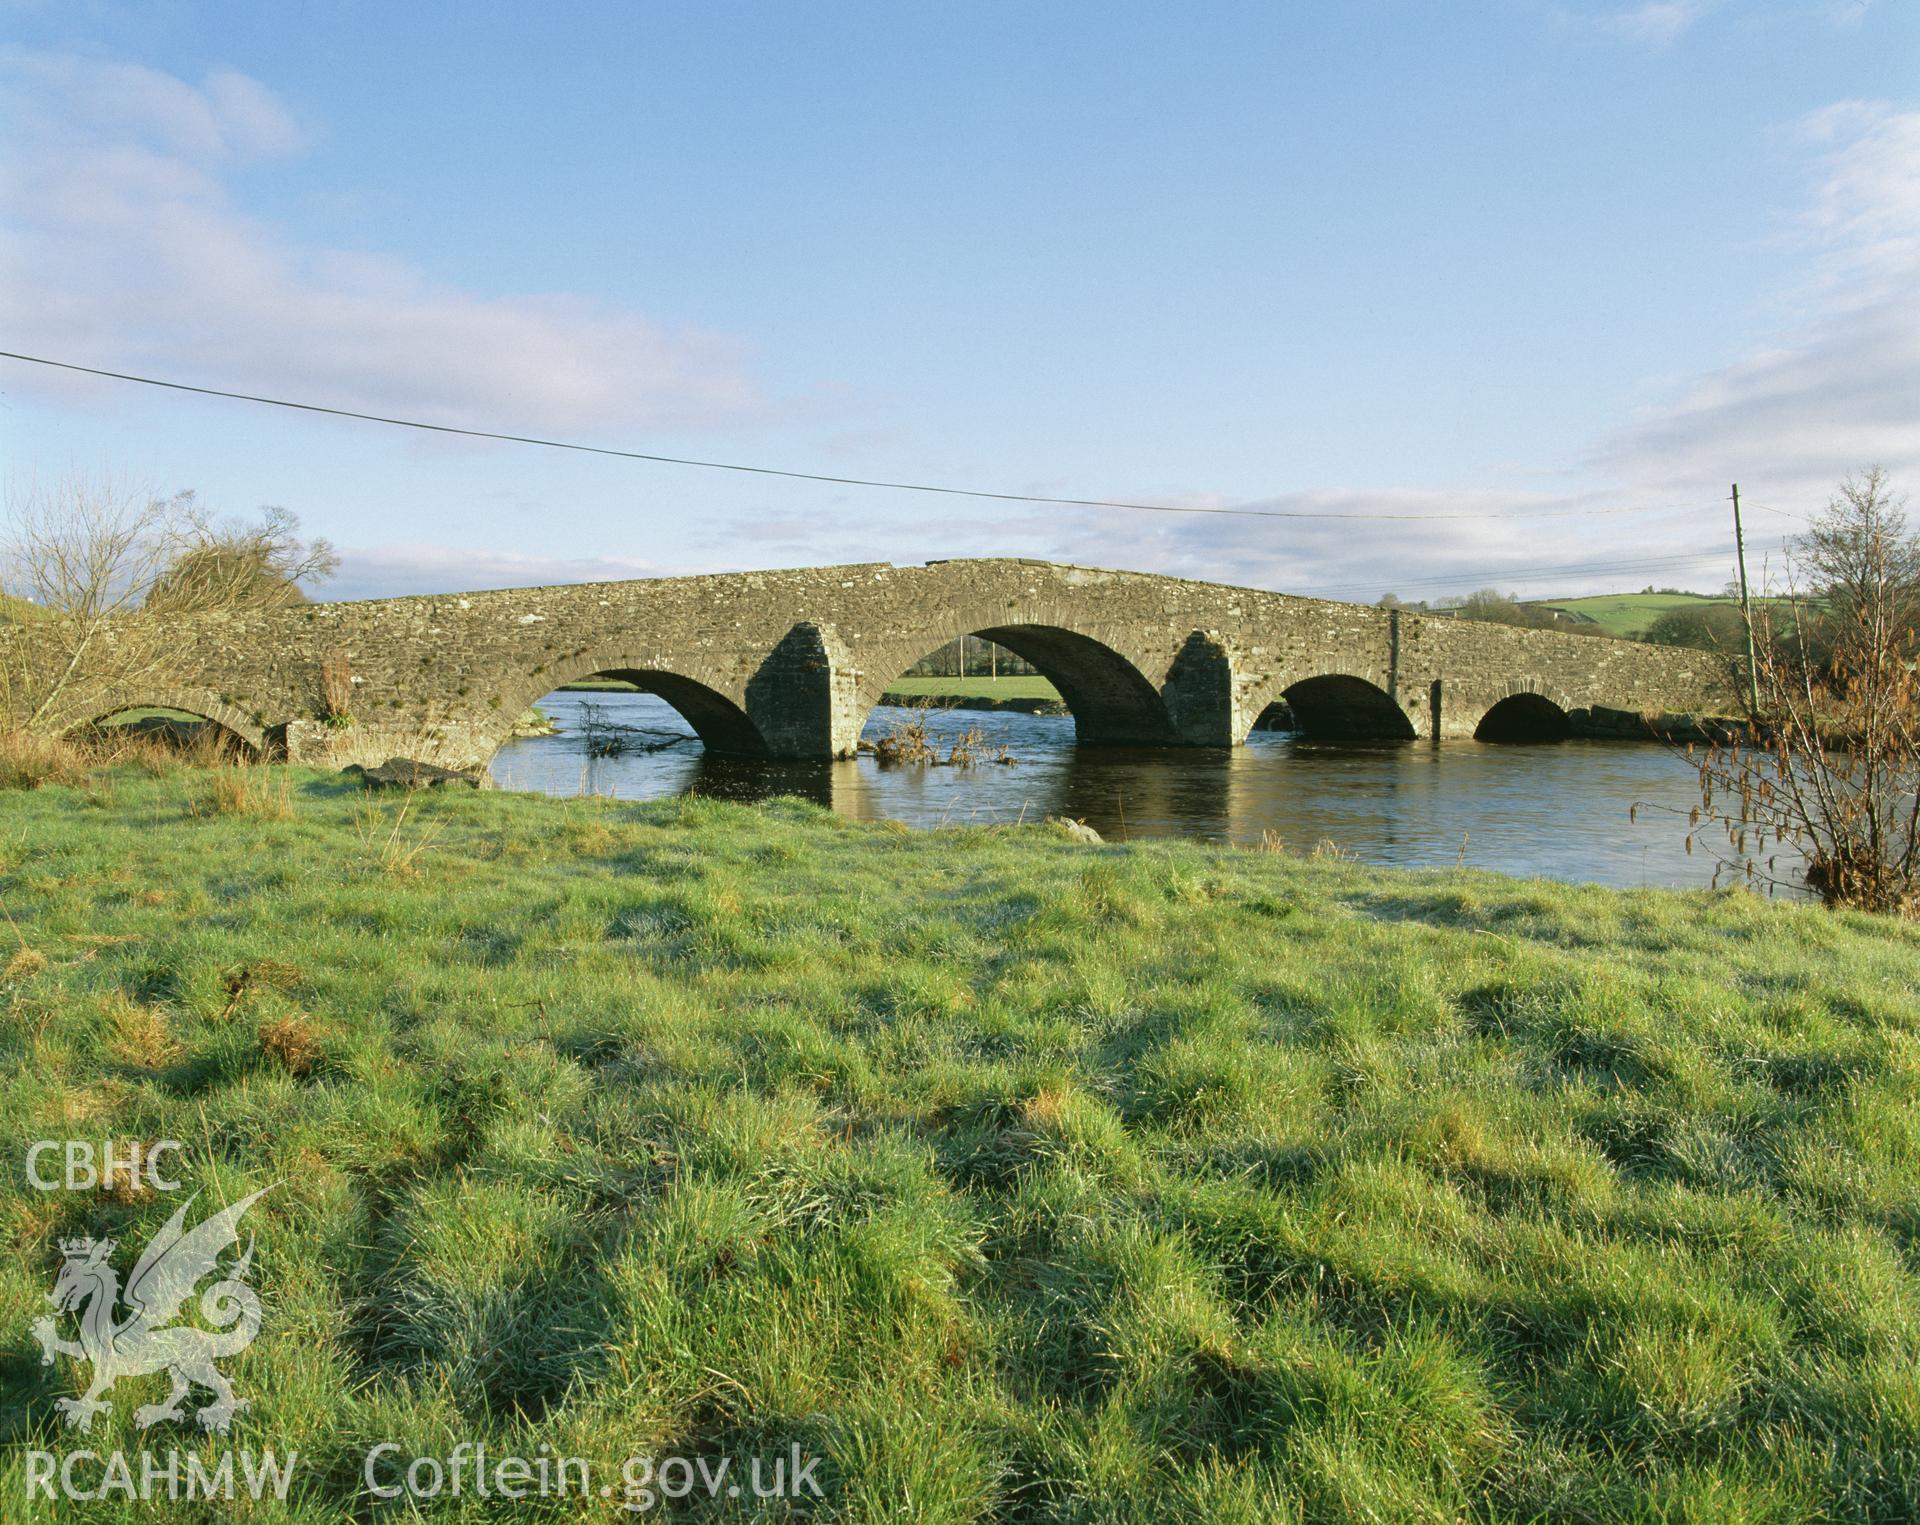 Colour transparency showing a view of Pont Gogoyan, Llanddewi Brefi, produced by Iain Wright, June 2004.